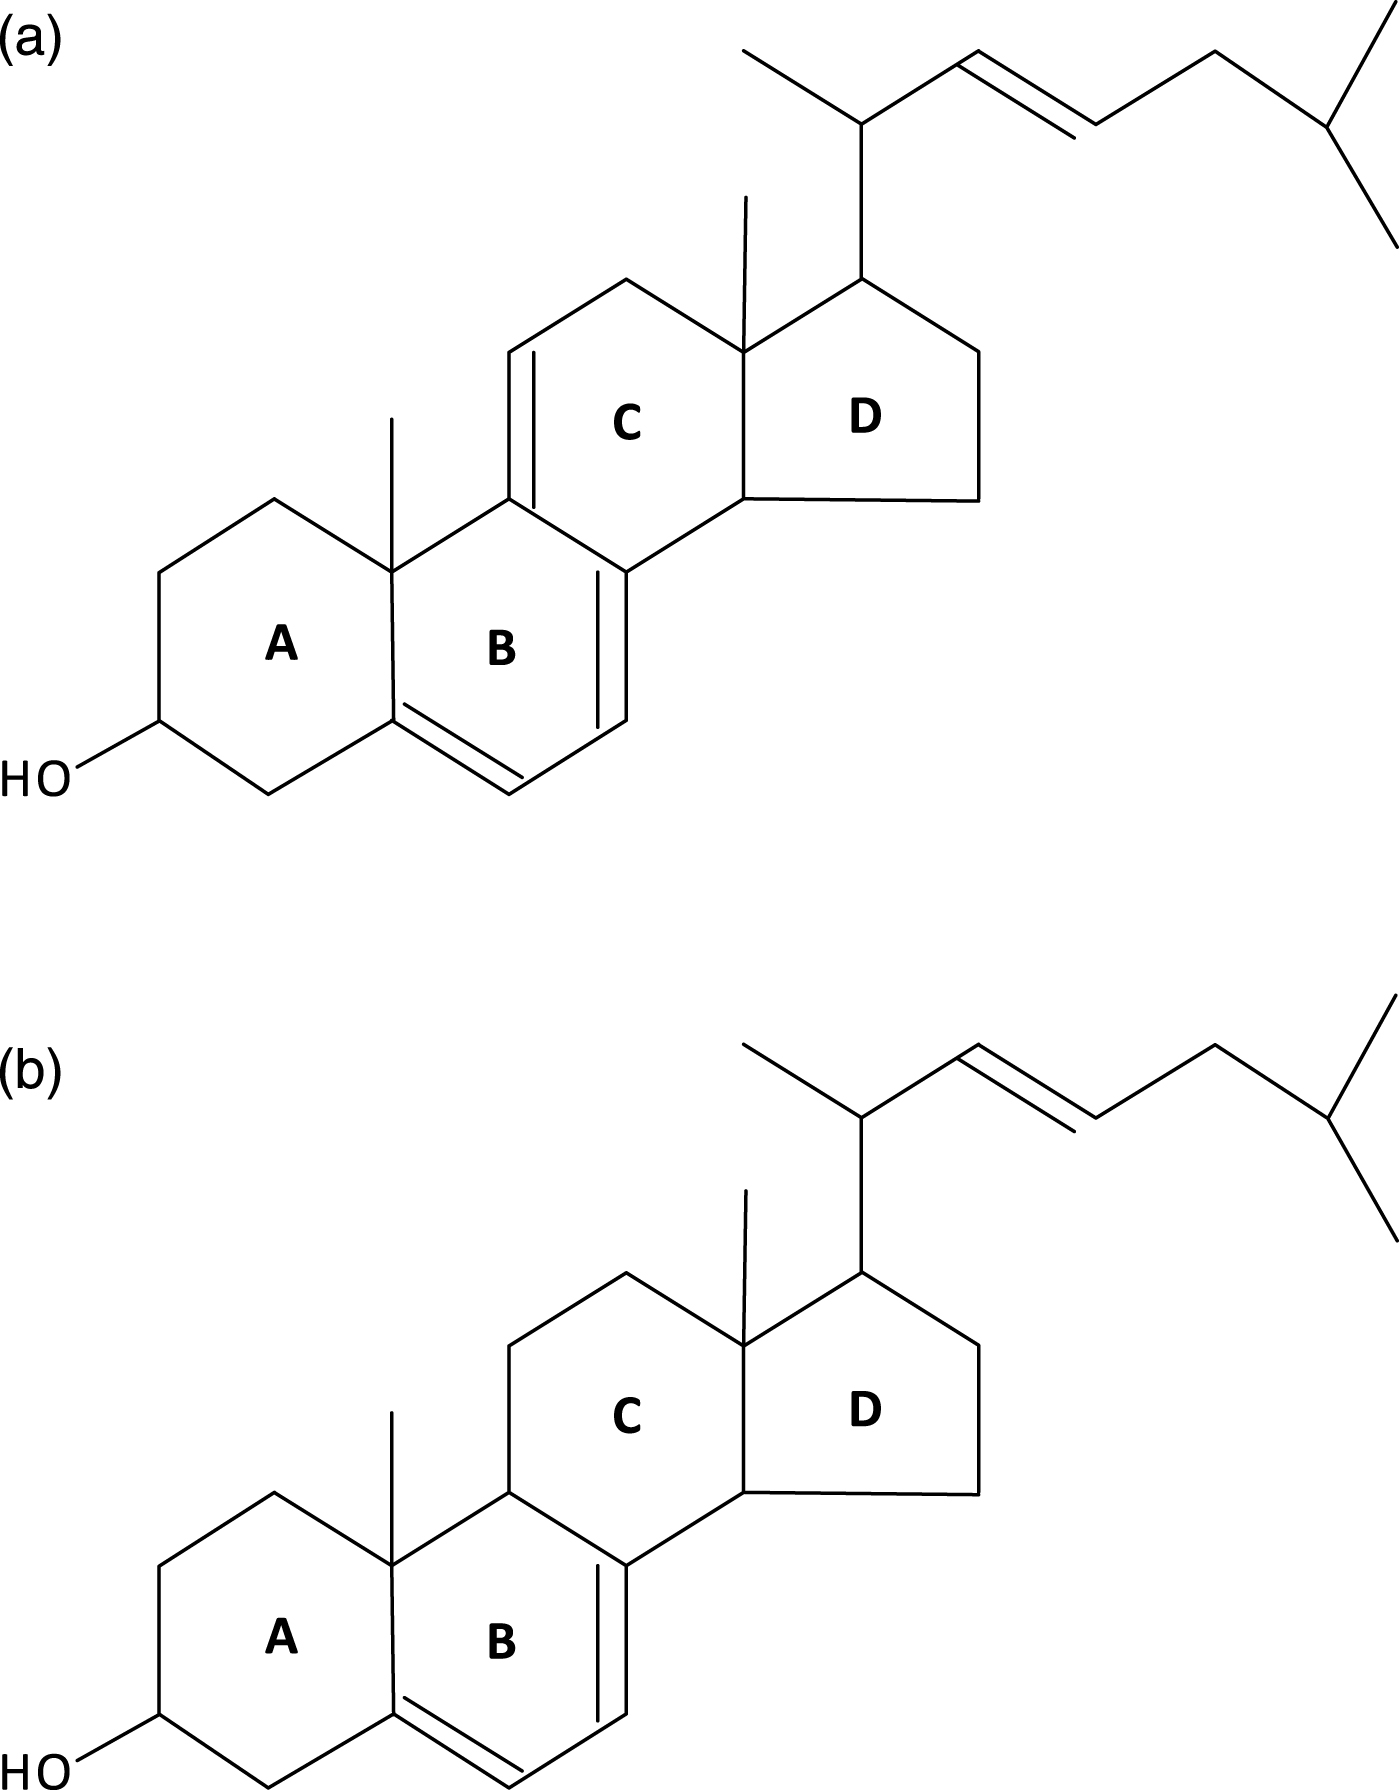 a: Compound b in Fig. 1 of Kodner et al. [3]: C27 :4 Cholesta 5,7,9(11)-22-tetraene-3ßol. b: Compound c in Fig. 1 of Kodner et al. [3]: C27 :3 Cholesta, 5,7,22triene-3ßol, two molecules synthesized by the phylogenetically ancient choanoflagellate Monosiga brevicollis. Ergosterol (see Fig. 4) is the second most common sterol in choanoflagellates; hence, M. brevicollis must have a C-24 sterol-methyl transferase.